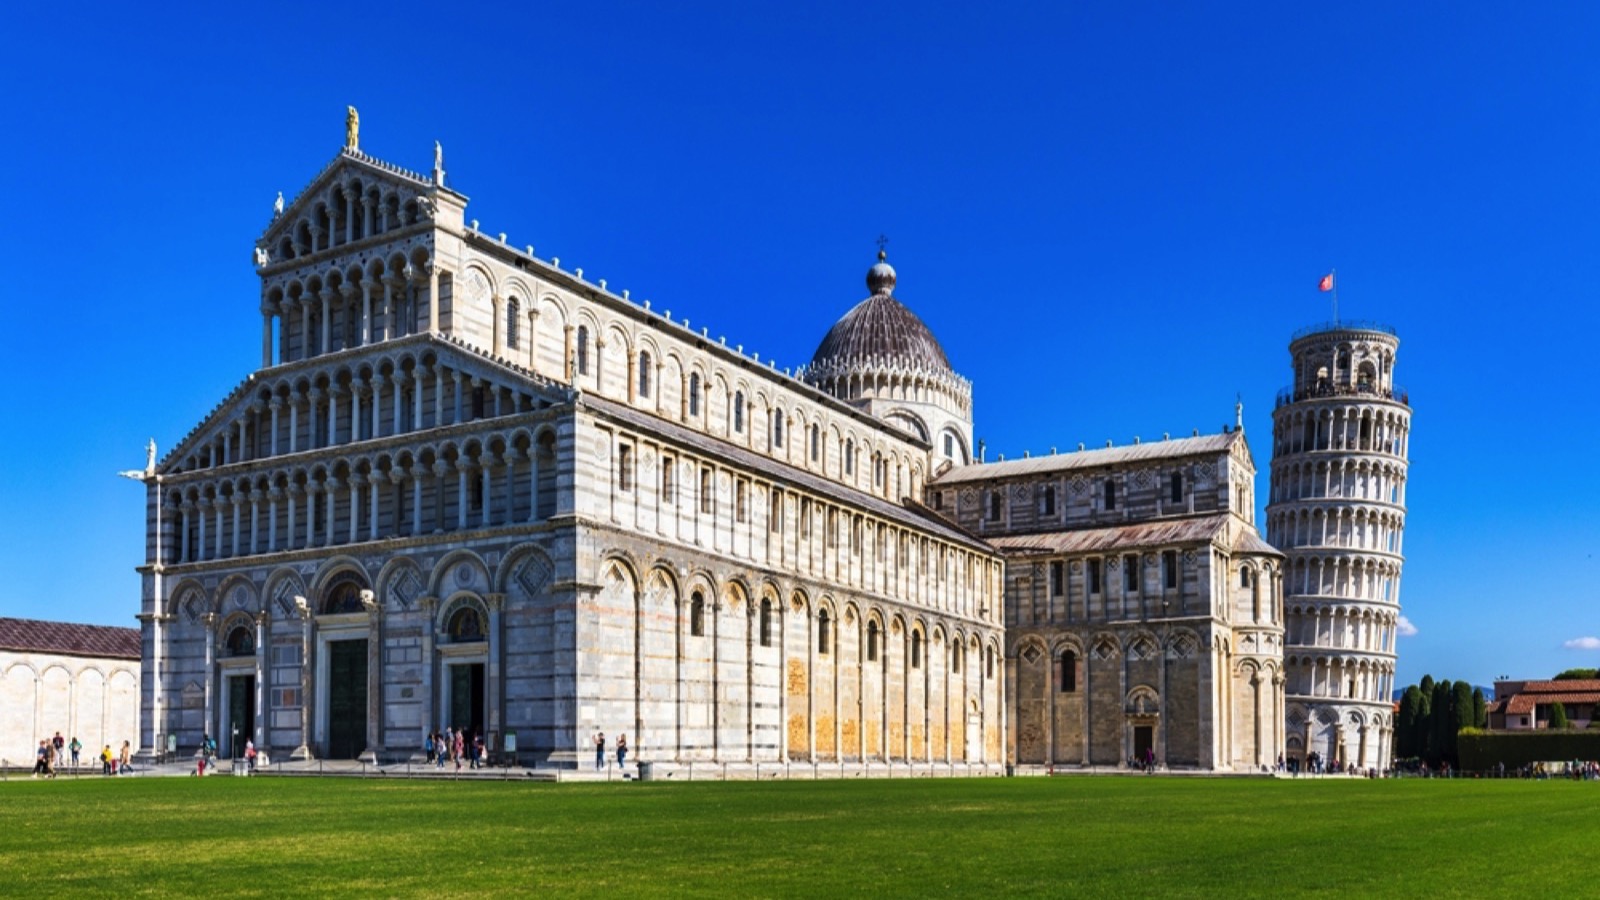 Pisa, Italy - 23 October 2021: Pisa Cathedral and the Leaning Tower in a sunny day in Pisa, Italy. Cathedral with Leaning Tower of Pisa on Piazza dei Miracoli, Tuscany, Italy.